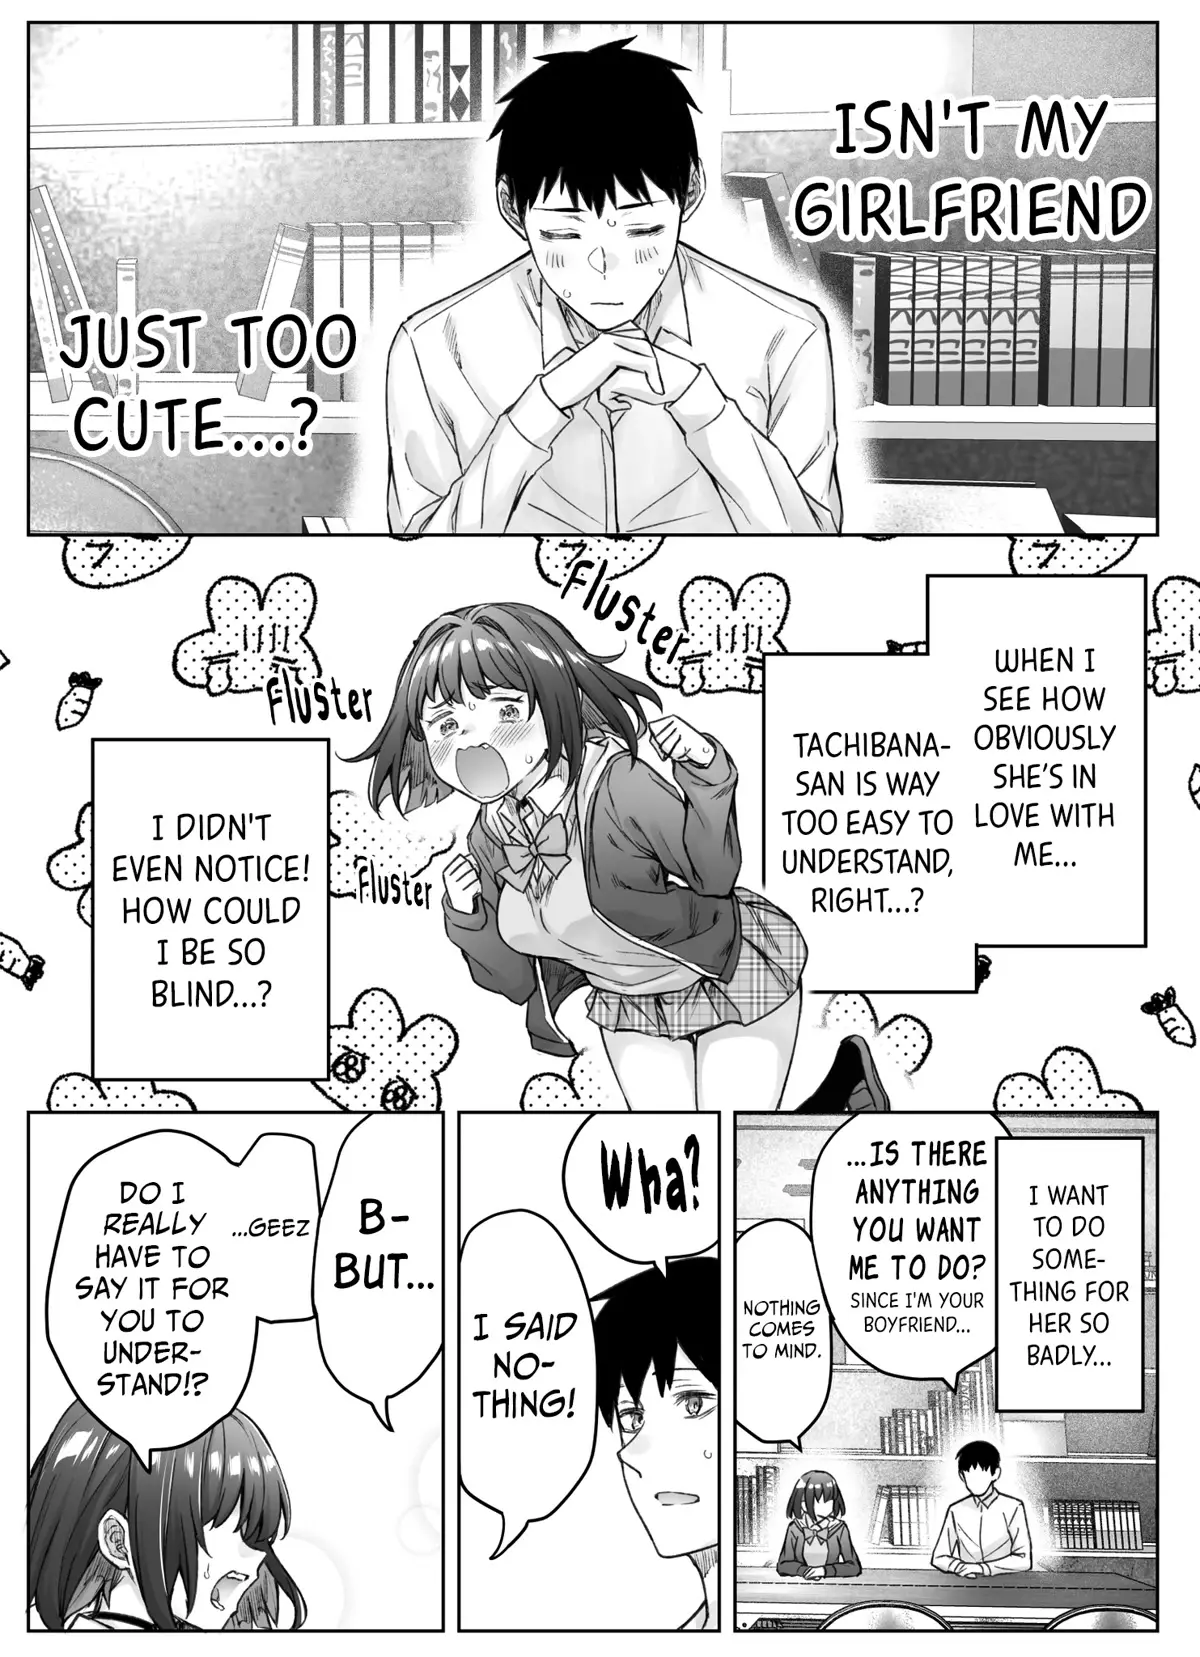 The Tsuntsuntsuntsuntsuntsun Tsuntsuntsuntsuntsundere Girl Getting Less And Less Tsun Day By Day - 57 page 1-92eece8c